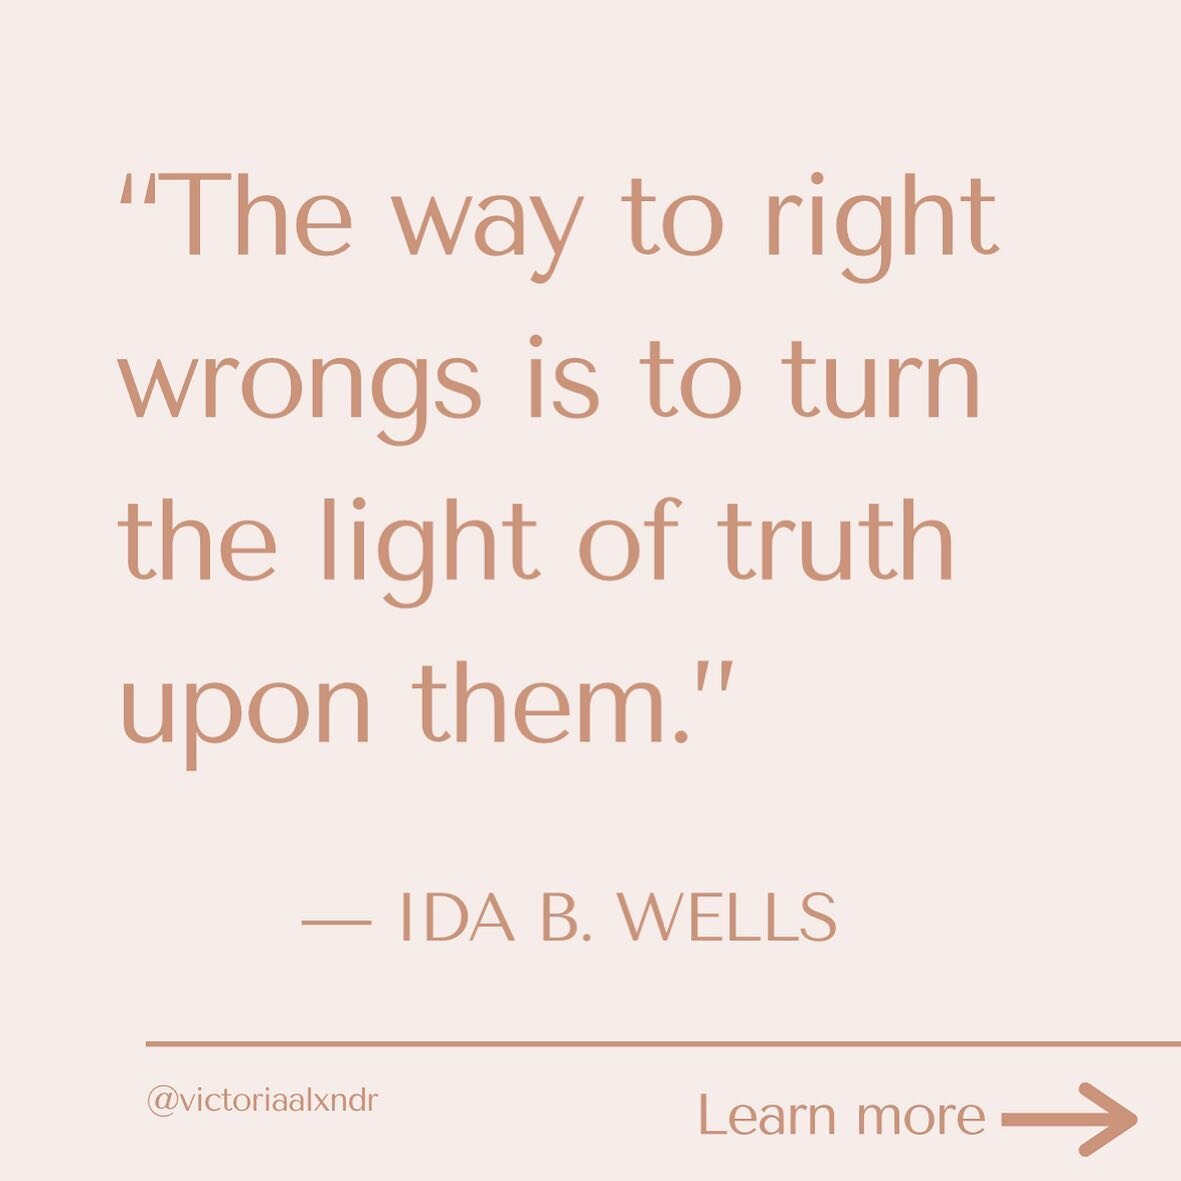 Ida B. Wells was a TITAN in the fight for Black lives, feminism, and anti-lynching. From the first quotes I ever heard from her, I knew she was BOUT IT: &ldquo;A Winchester rifle should have a place of honor in every Black home, and it should be used